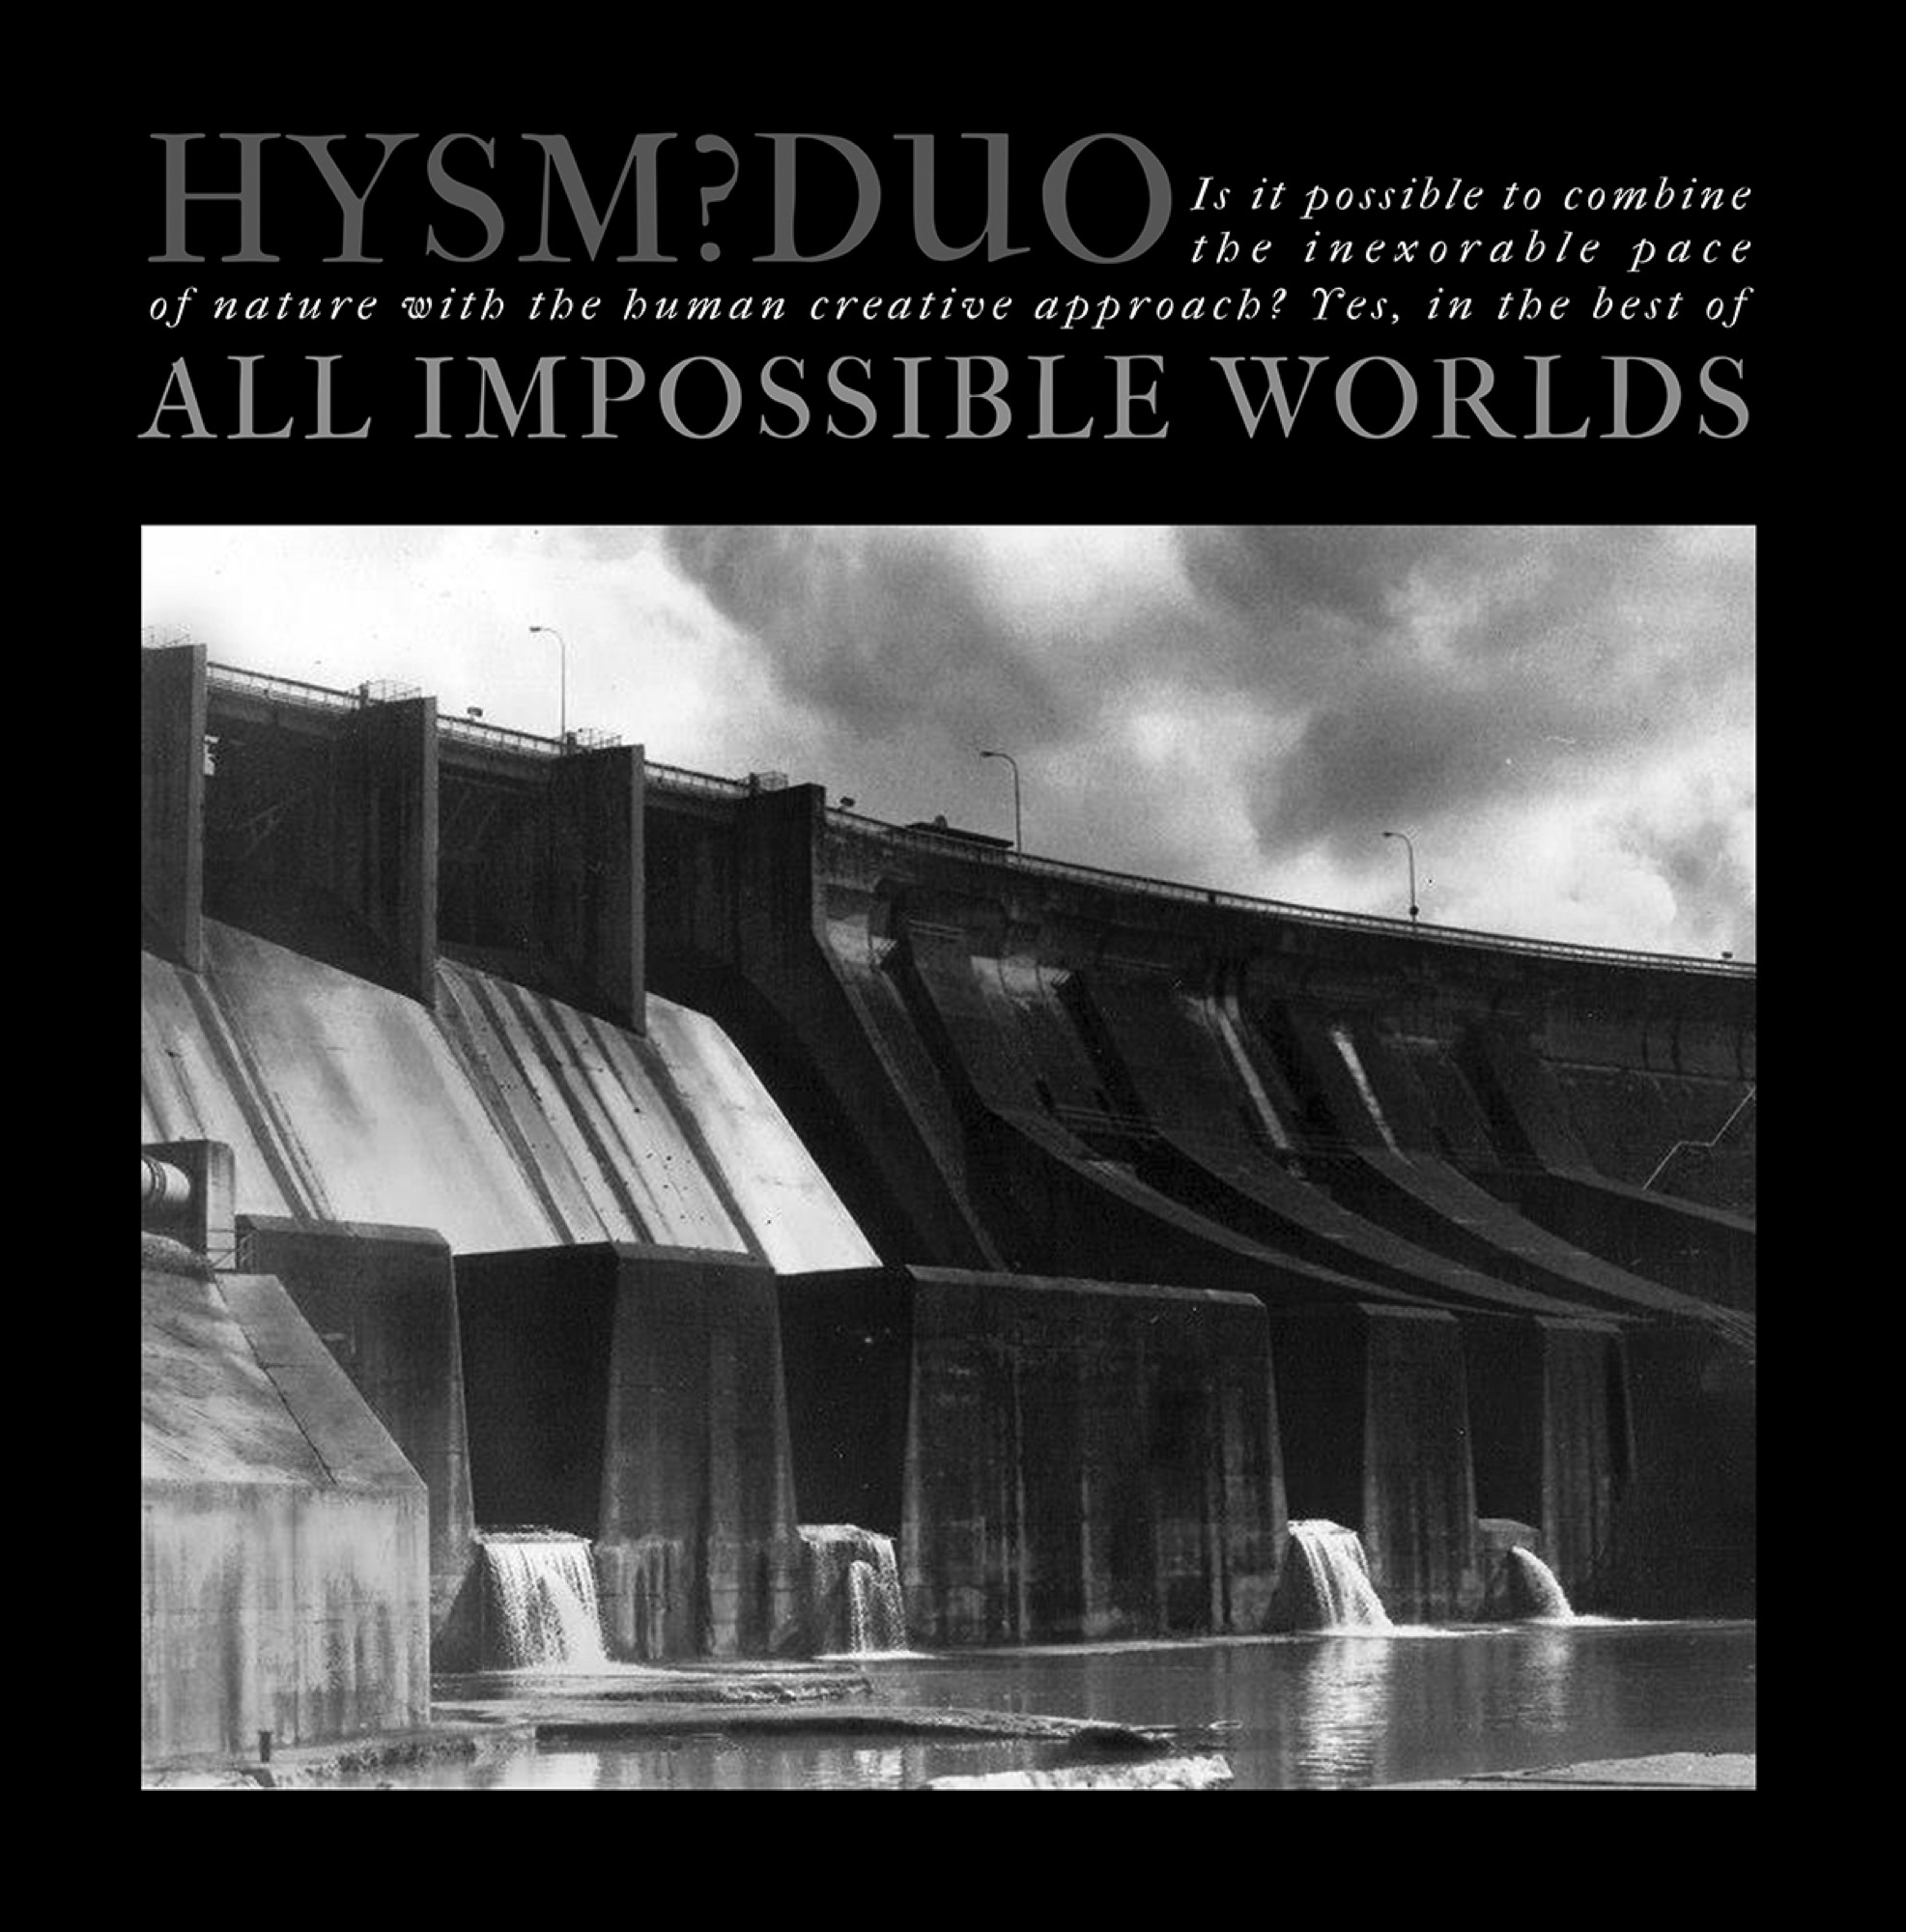 All Impossible Worlds